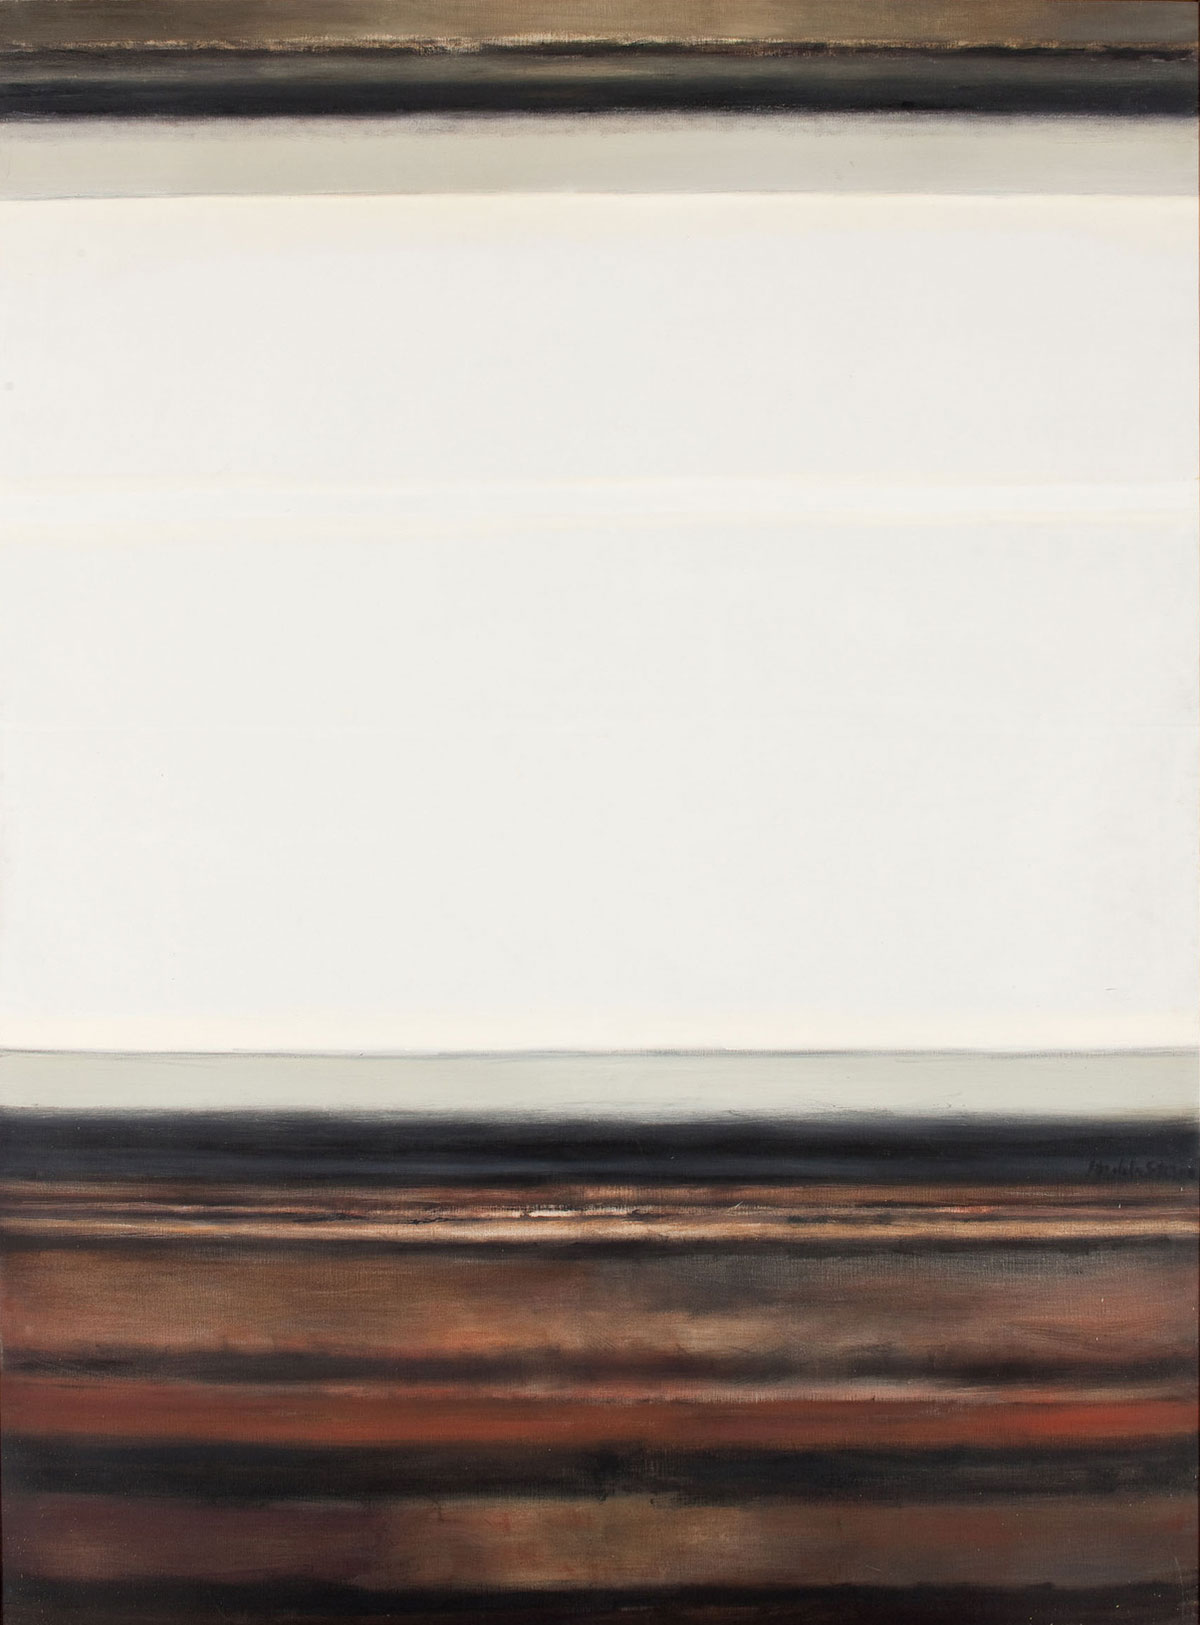 A hazy, painted abstract scene made with a bright center and dark, earthy striped sections at the top and bottom, creating the illusion of a horizon line